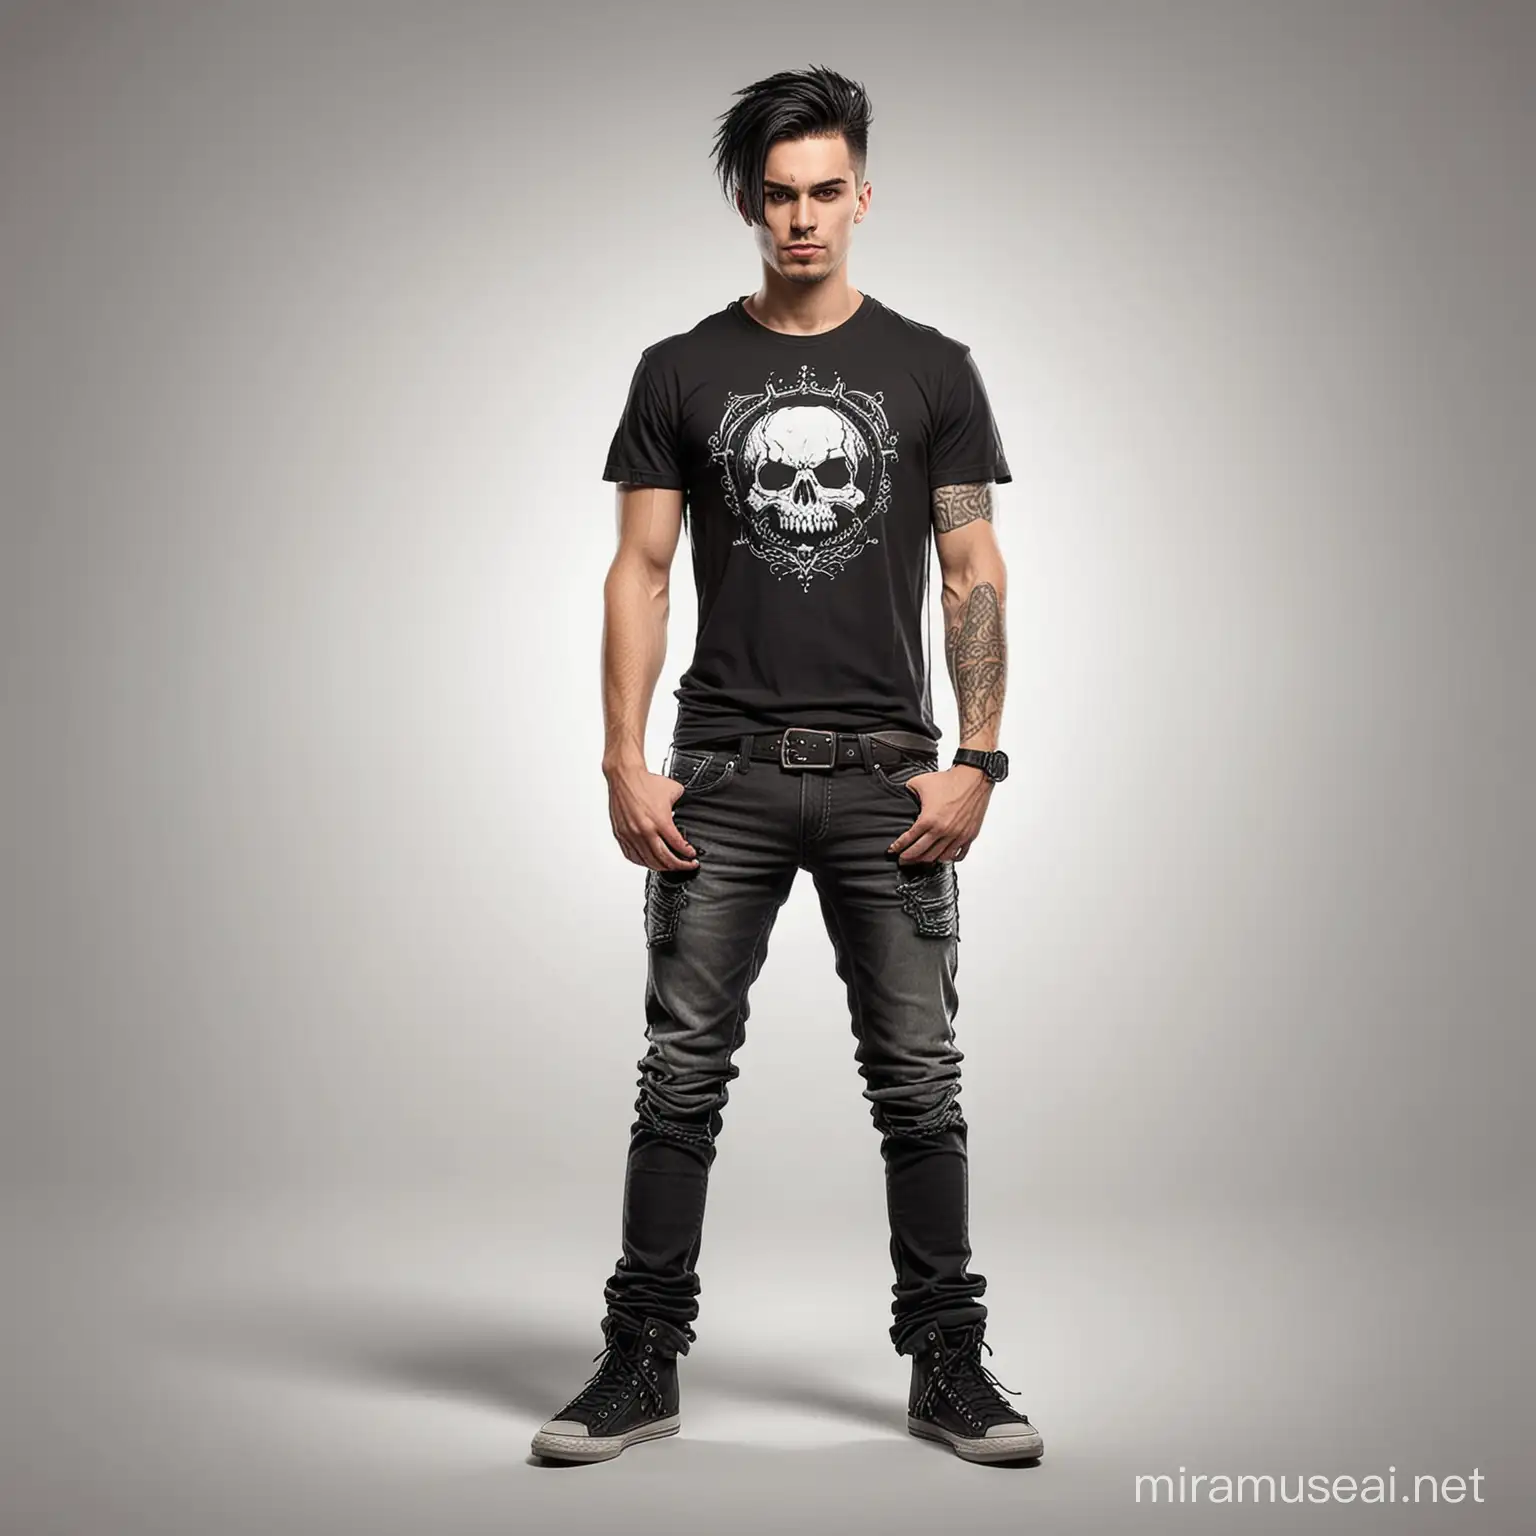 Gothic Cartoon Style Man in Black Tshirt and Jeans on White Background